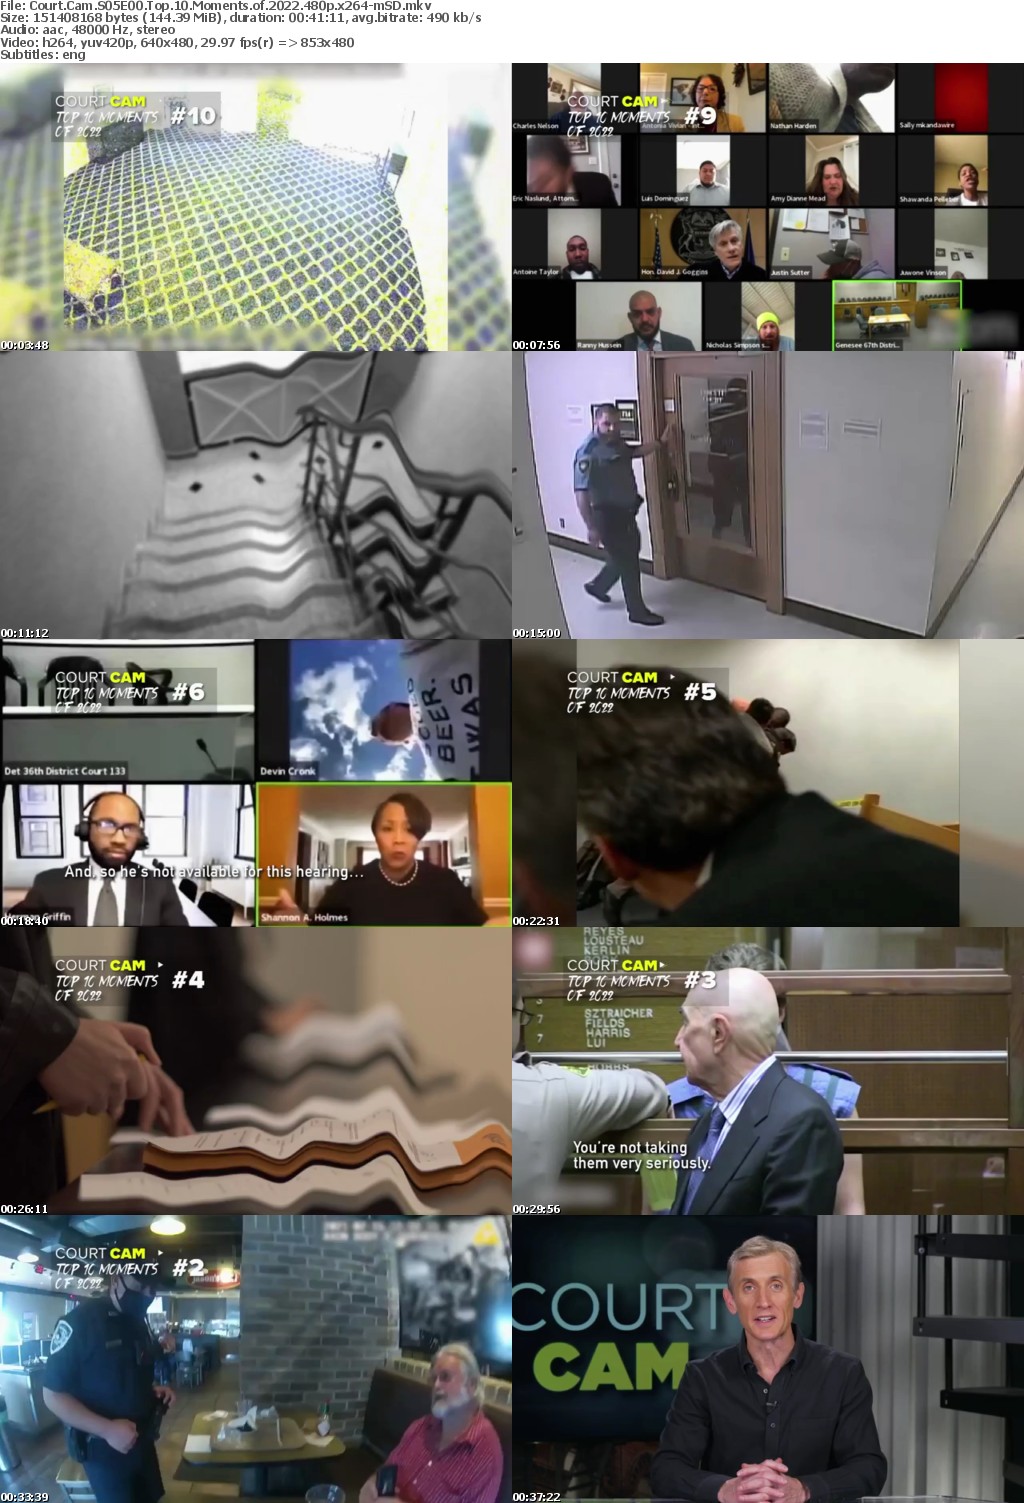 Court Cam S05E00 Top 10 Moments of 2022 480p x264-mSD